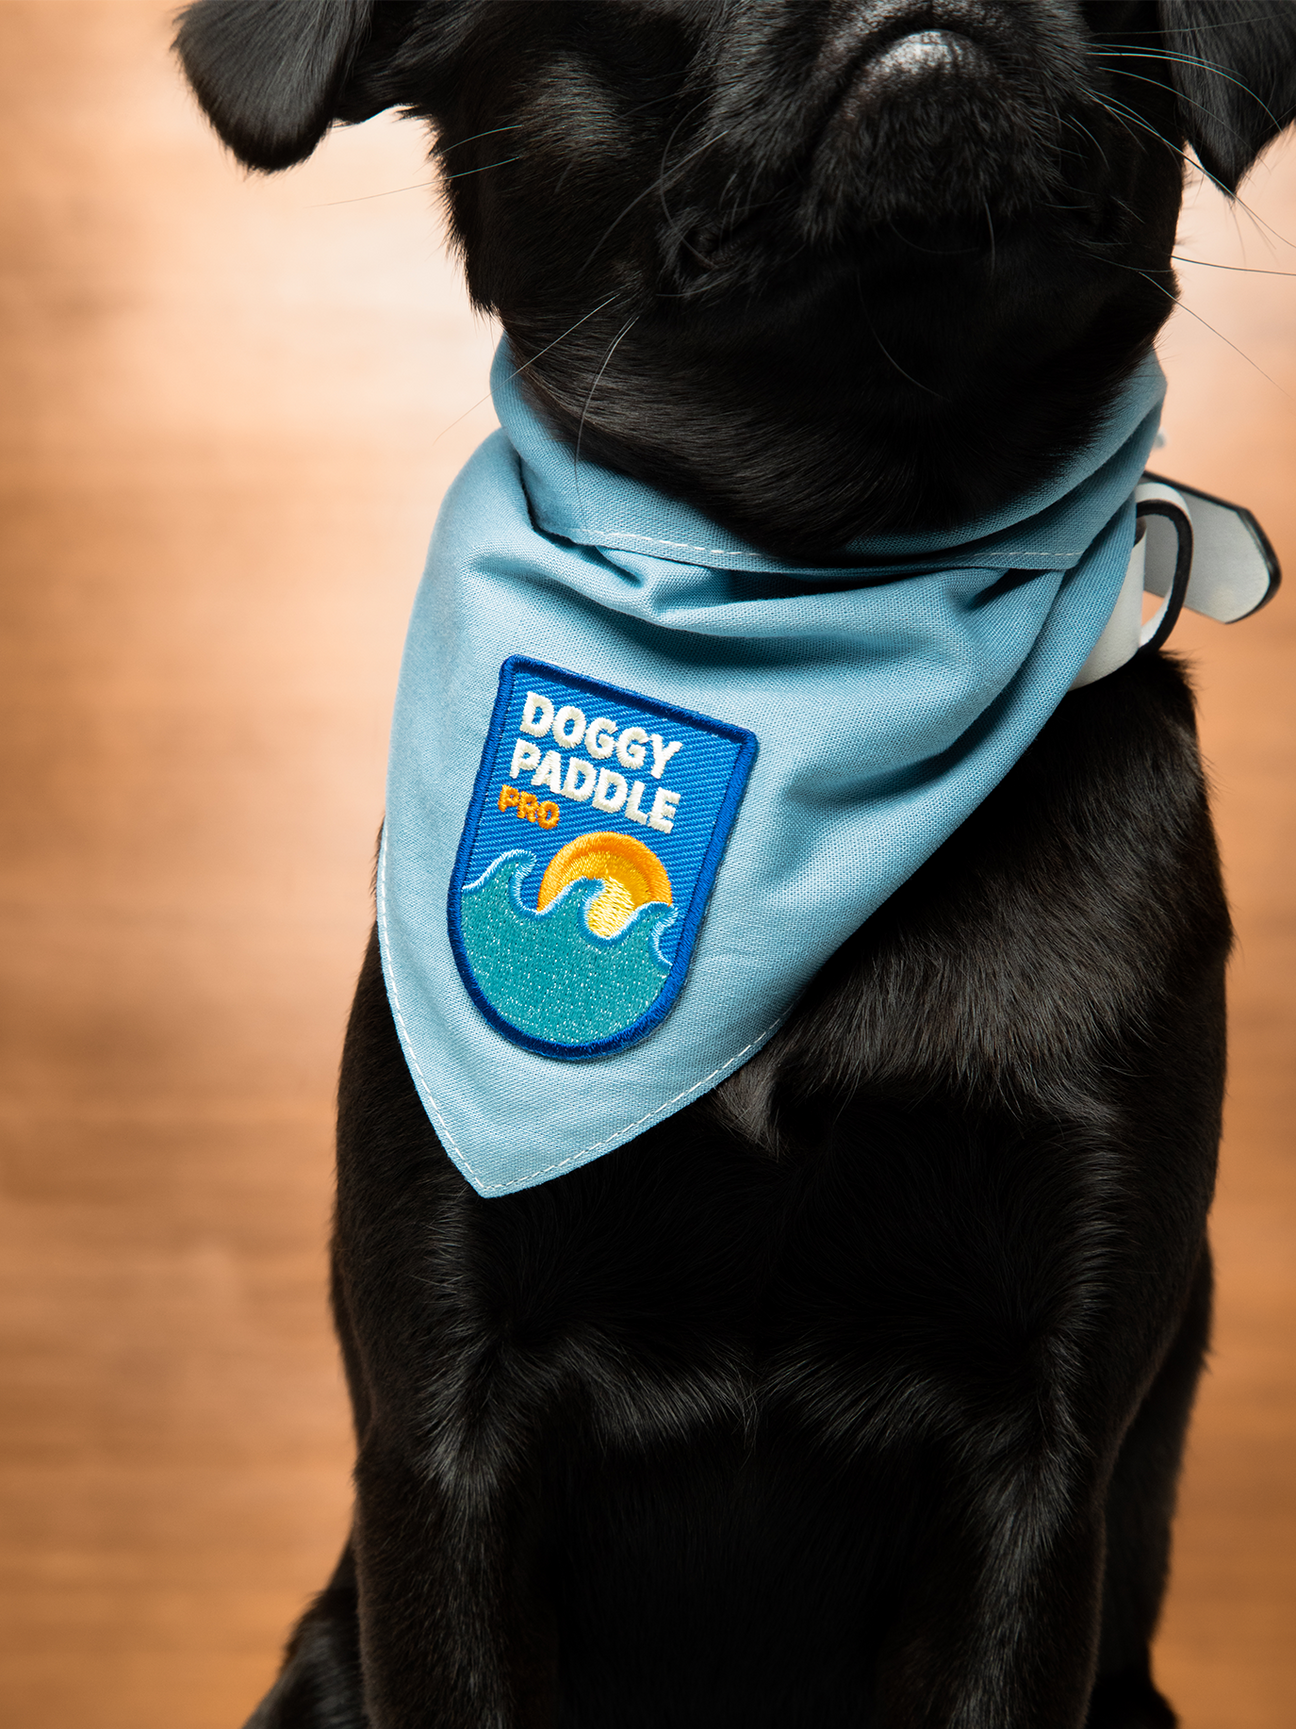 Scout's Honour "Paddle Pro" Iron-On Patch - Henlo Pets